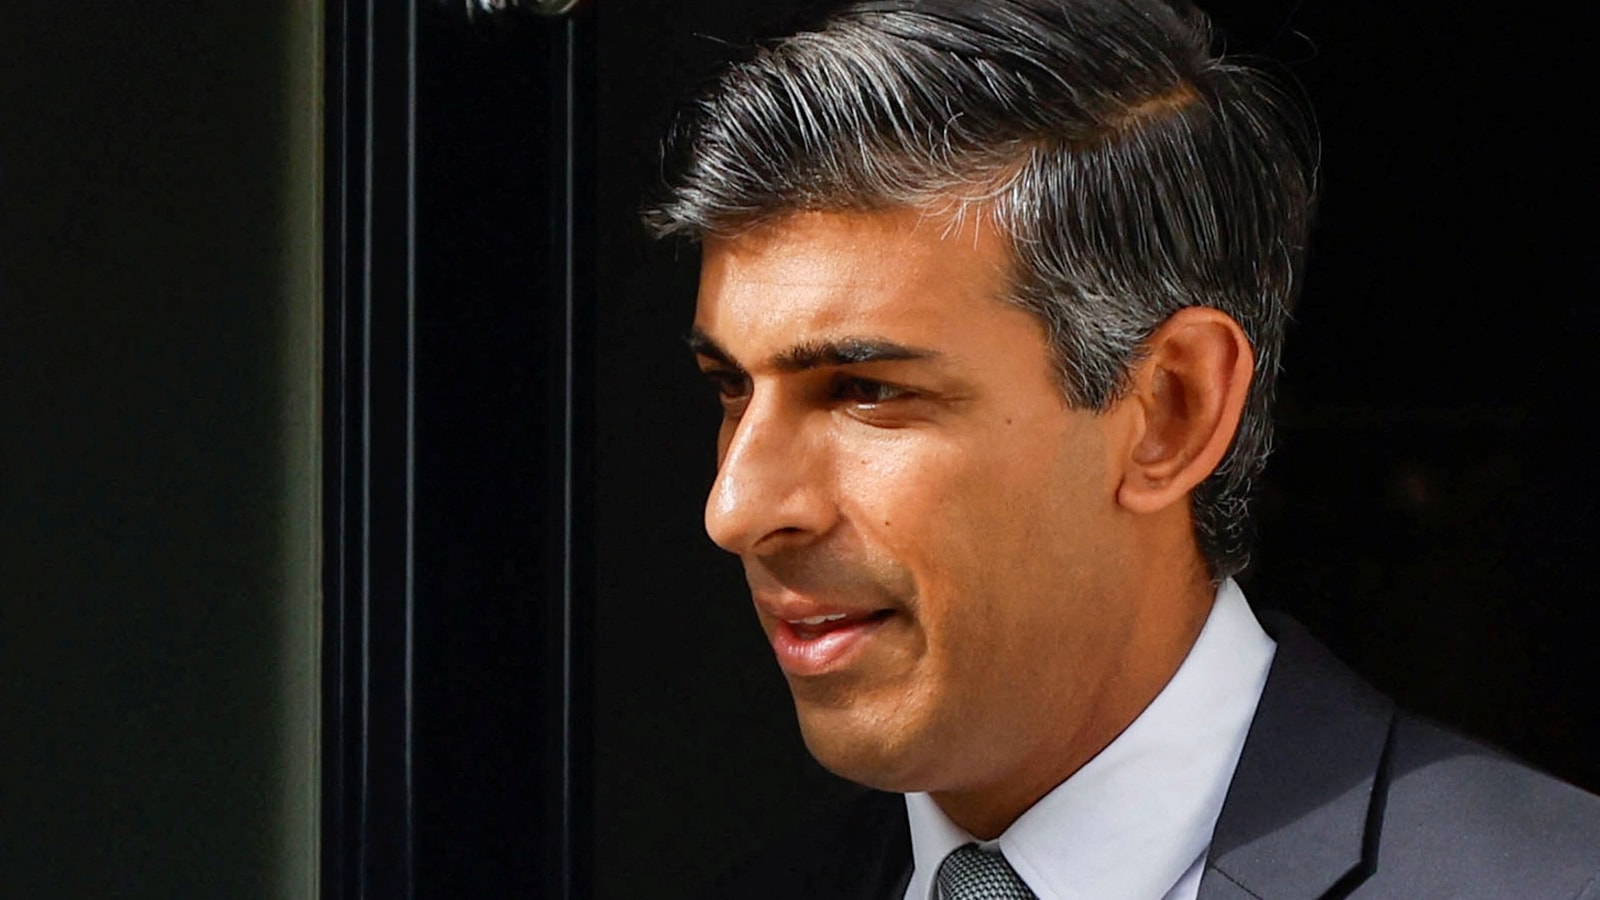 What’s next for Indian-born Rishi Sunak after UK PM race